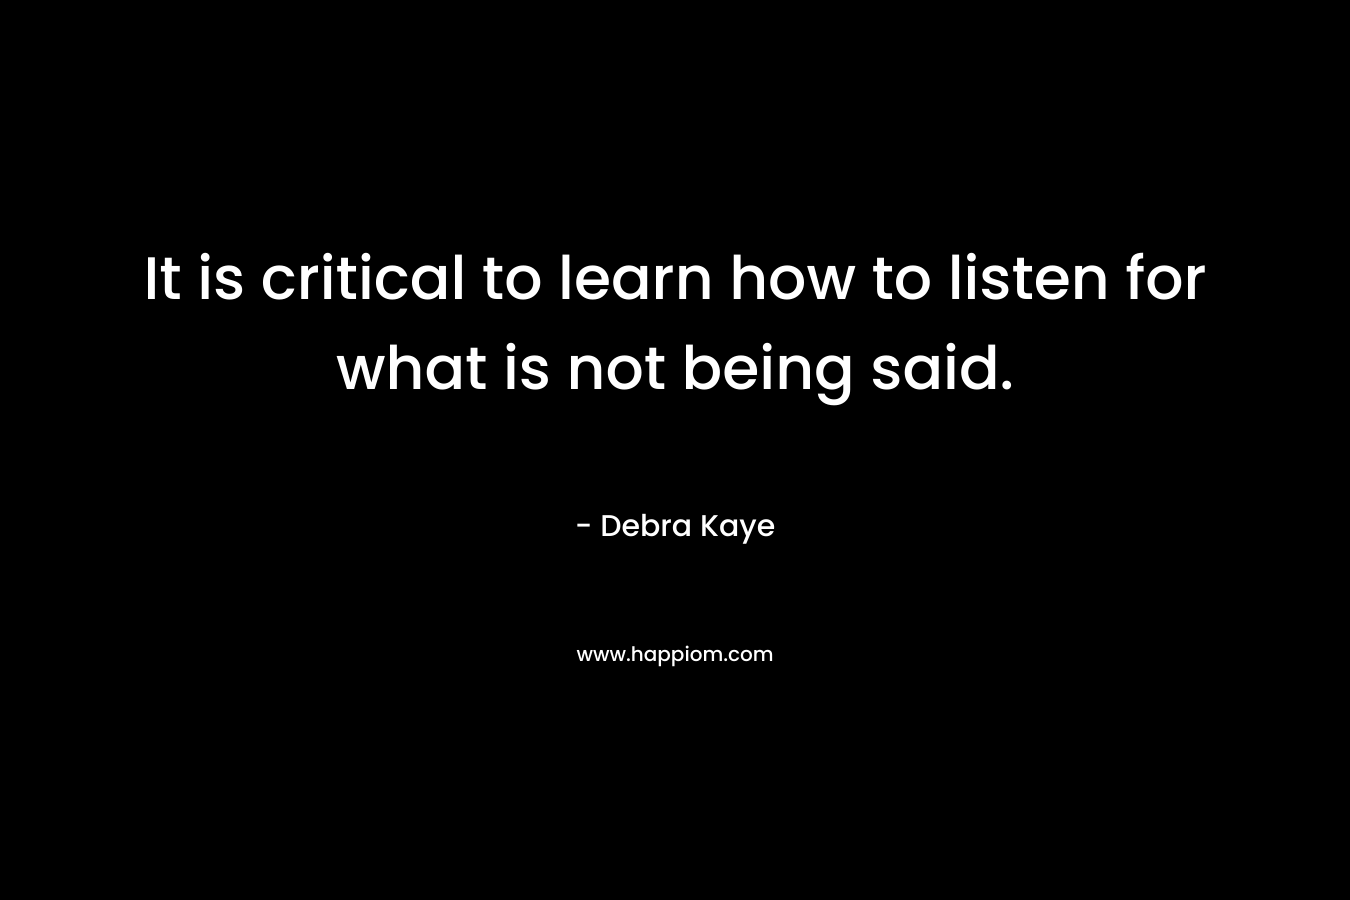 It is critical to learn how to listen for what is not being said. – Debra Kaye